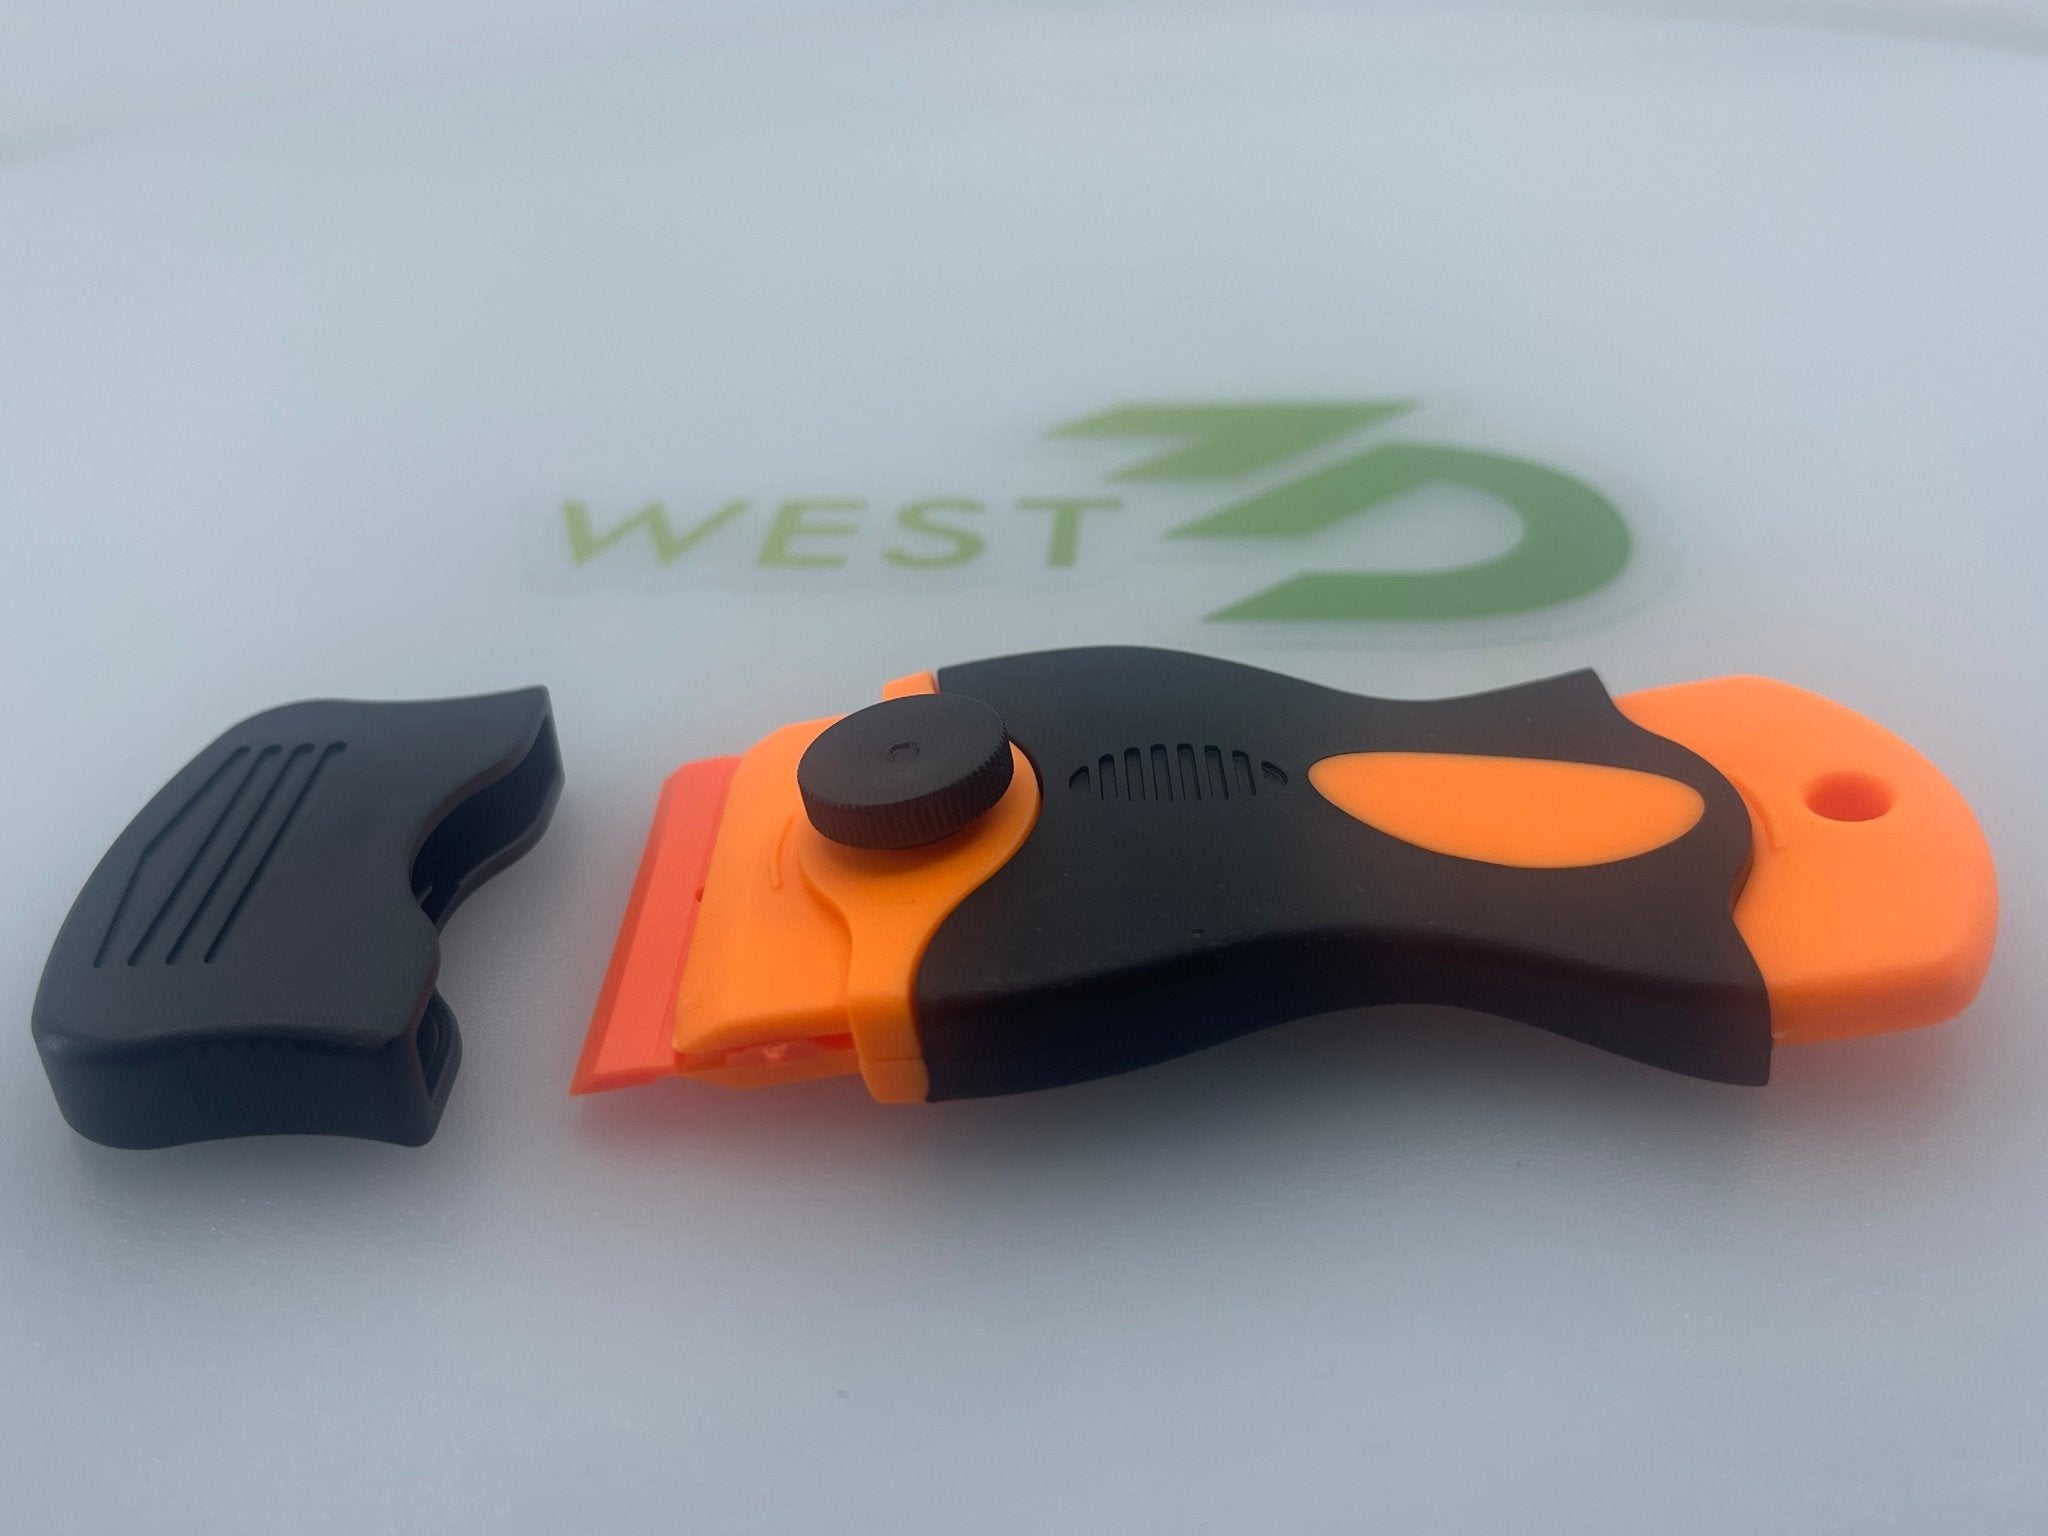 Plastic Razer / Printed Part Scraper for removing off build plate - West3D Printing - N/A